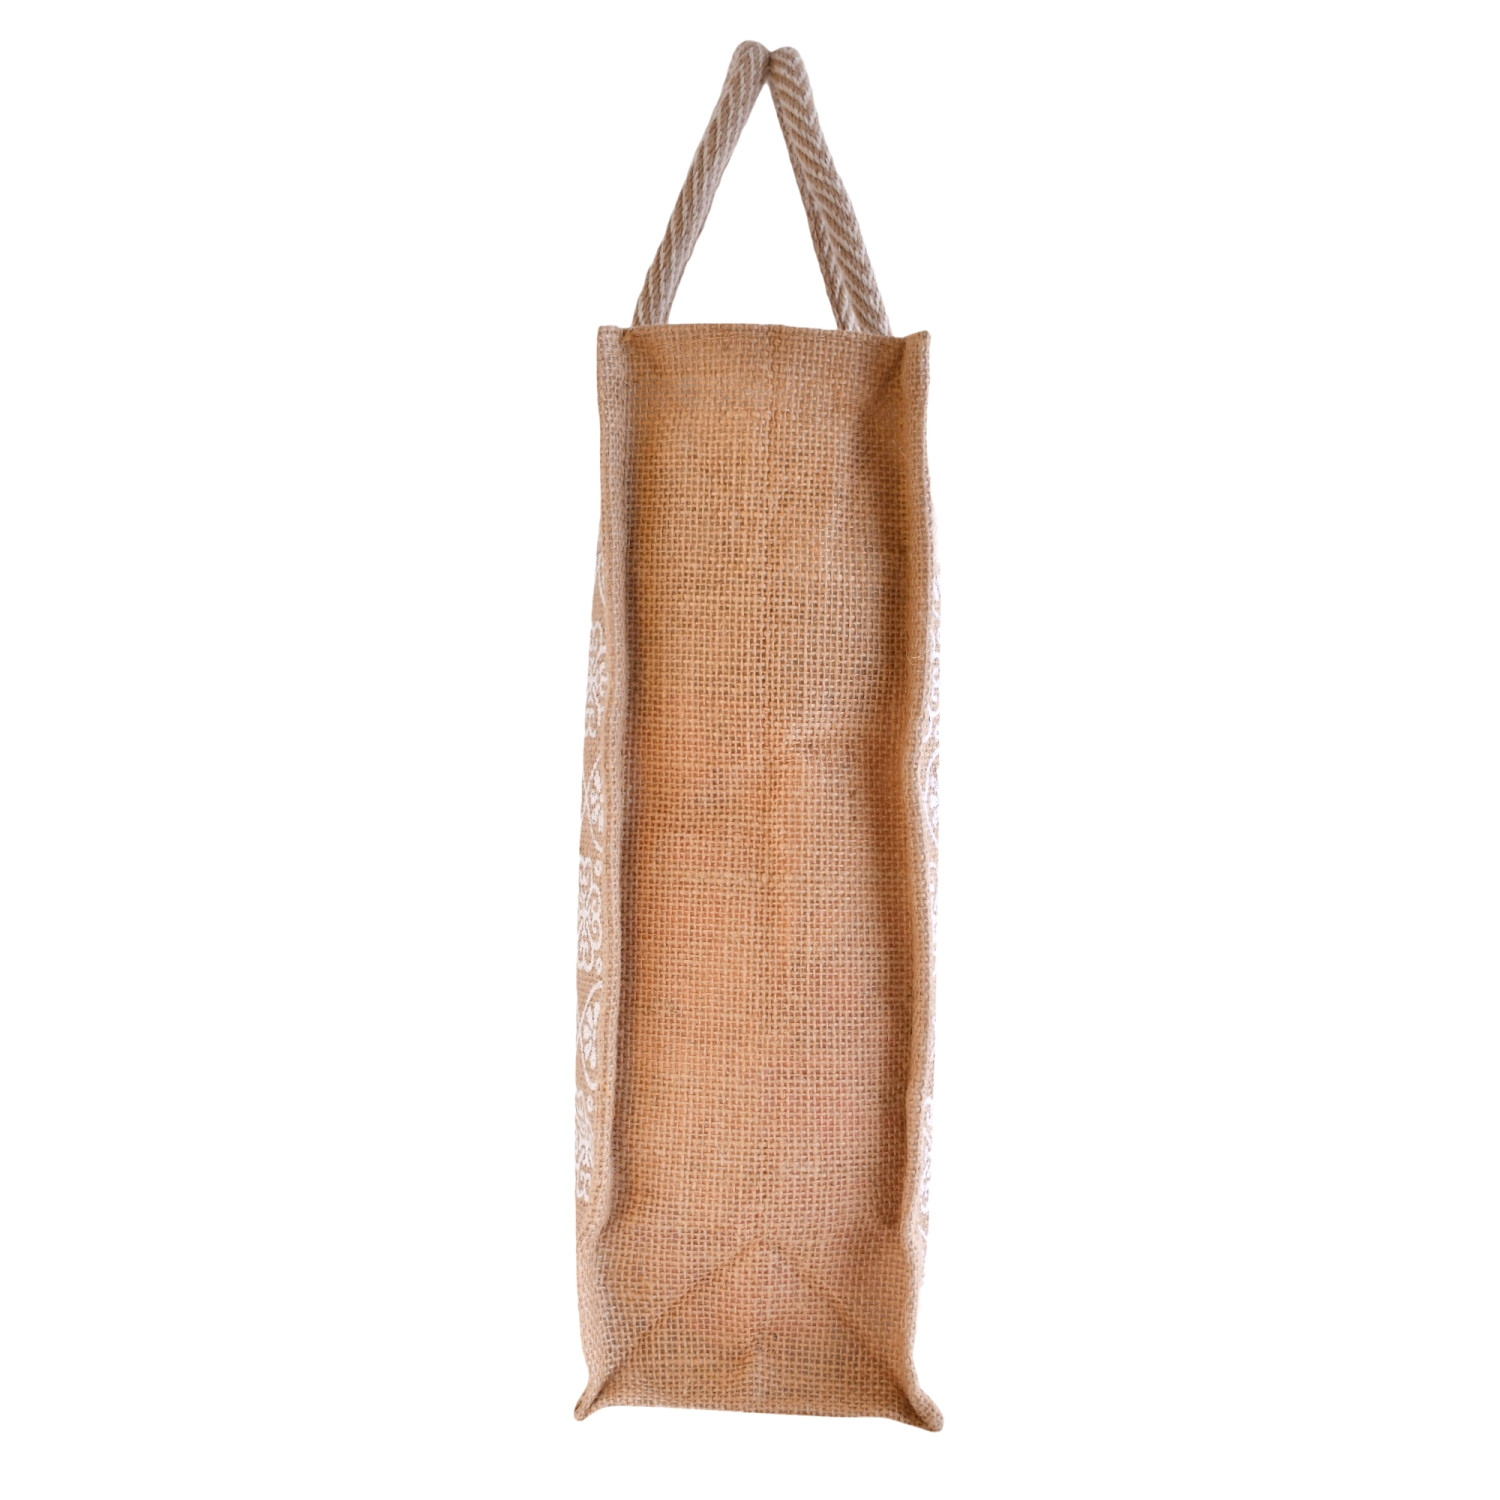 Kuber Industries Grocery Bag | Jute Carry Bag | Lunch Bags for Office | Zipper Grocery Bag with Handle | Vegetable Bag | White Flower Shopping Bag | Medium | Brown